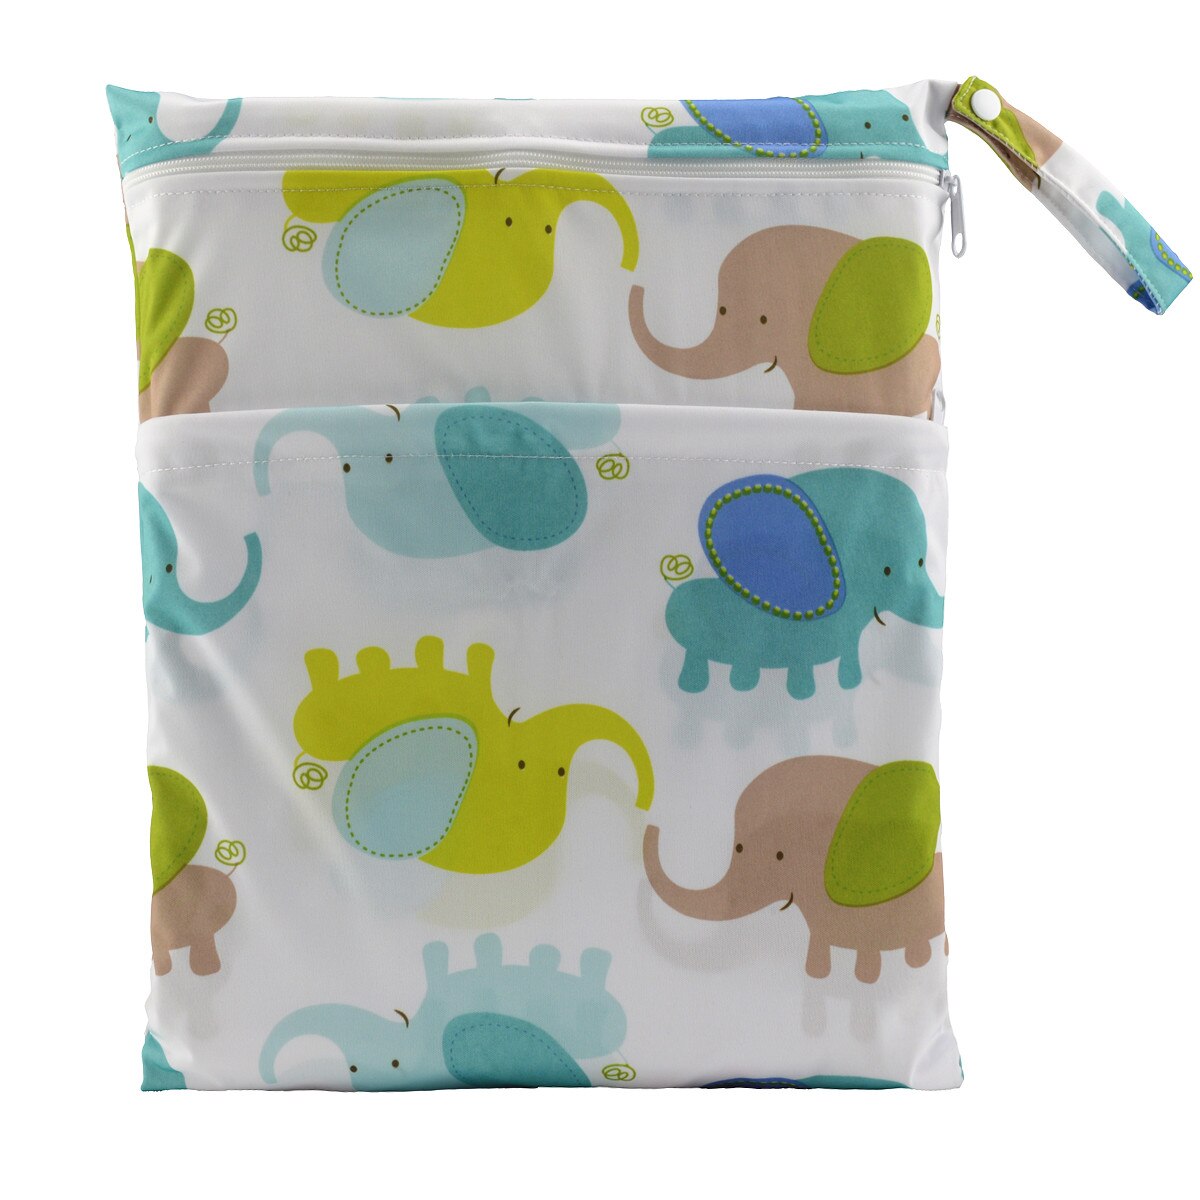 [Sigzagor]Wet Dry Bag With Two Zippered For Baby Diapers Nappies Waterproof Reusable 36cmx29cm baby magazin 